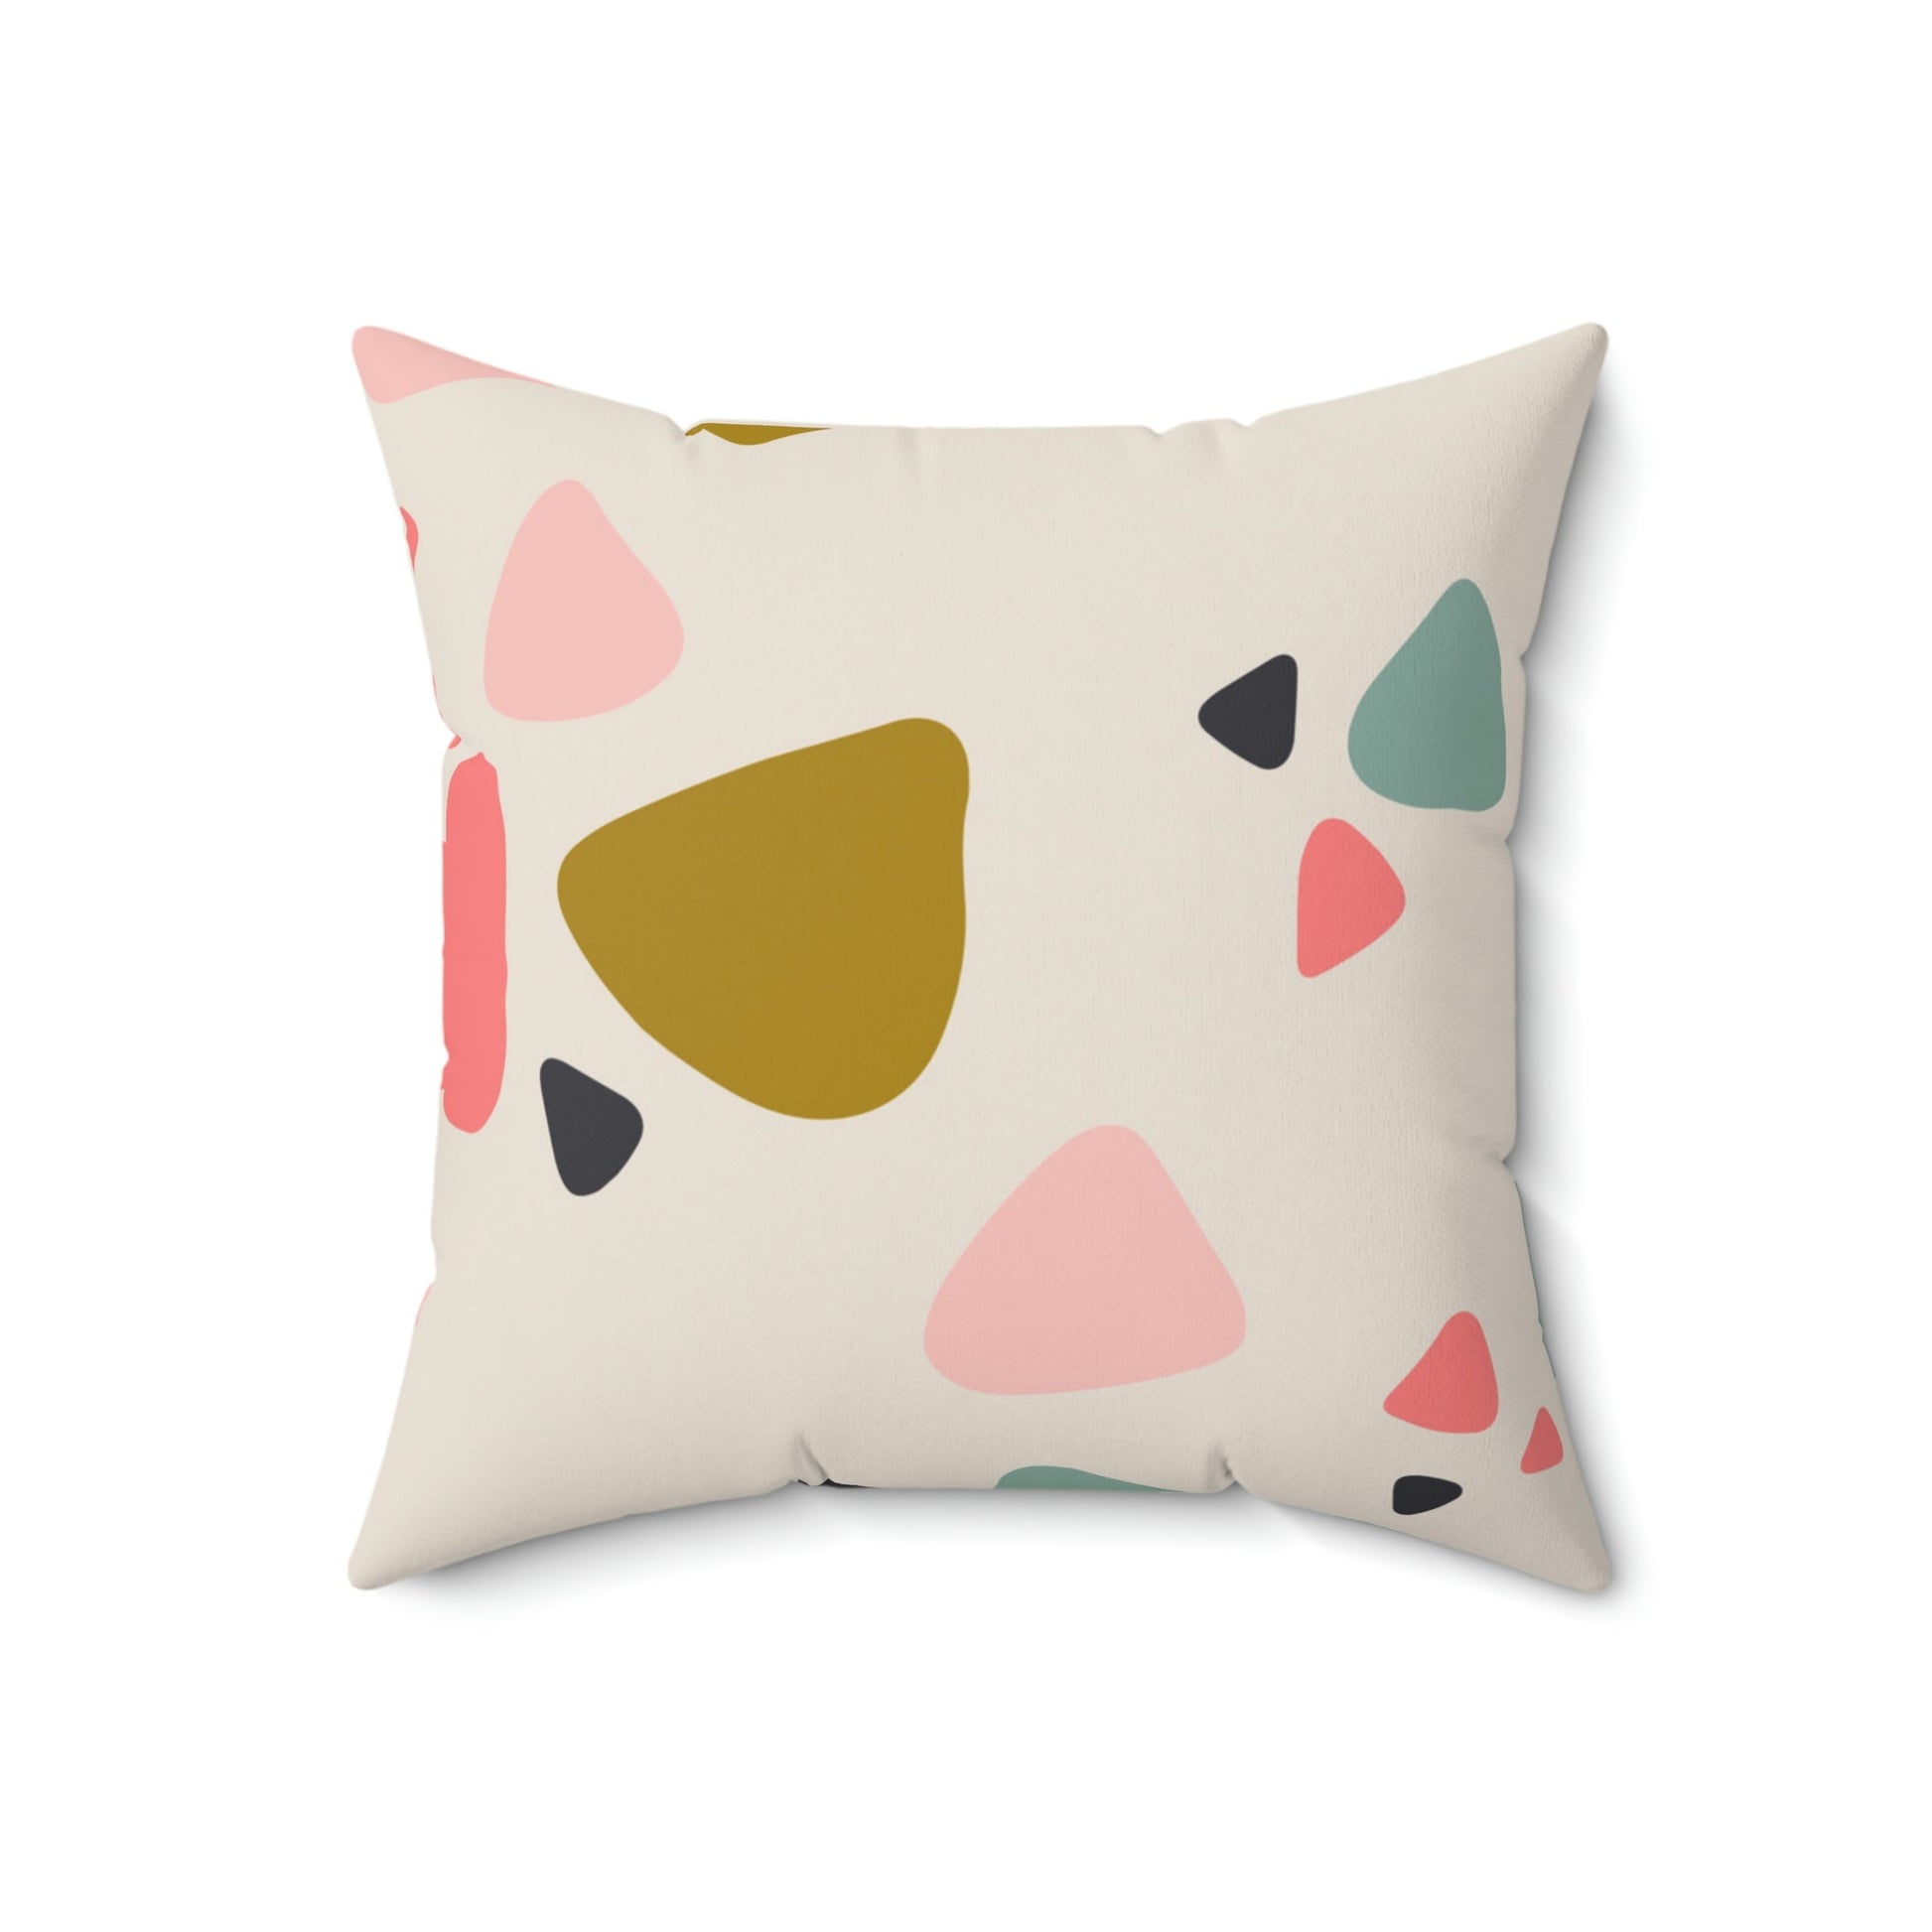 Broken Pieces Square Pillow Home Decor Pink Sweetheart